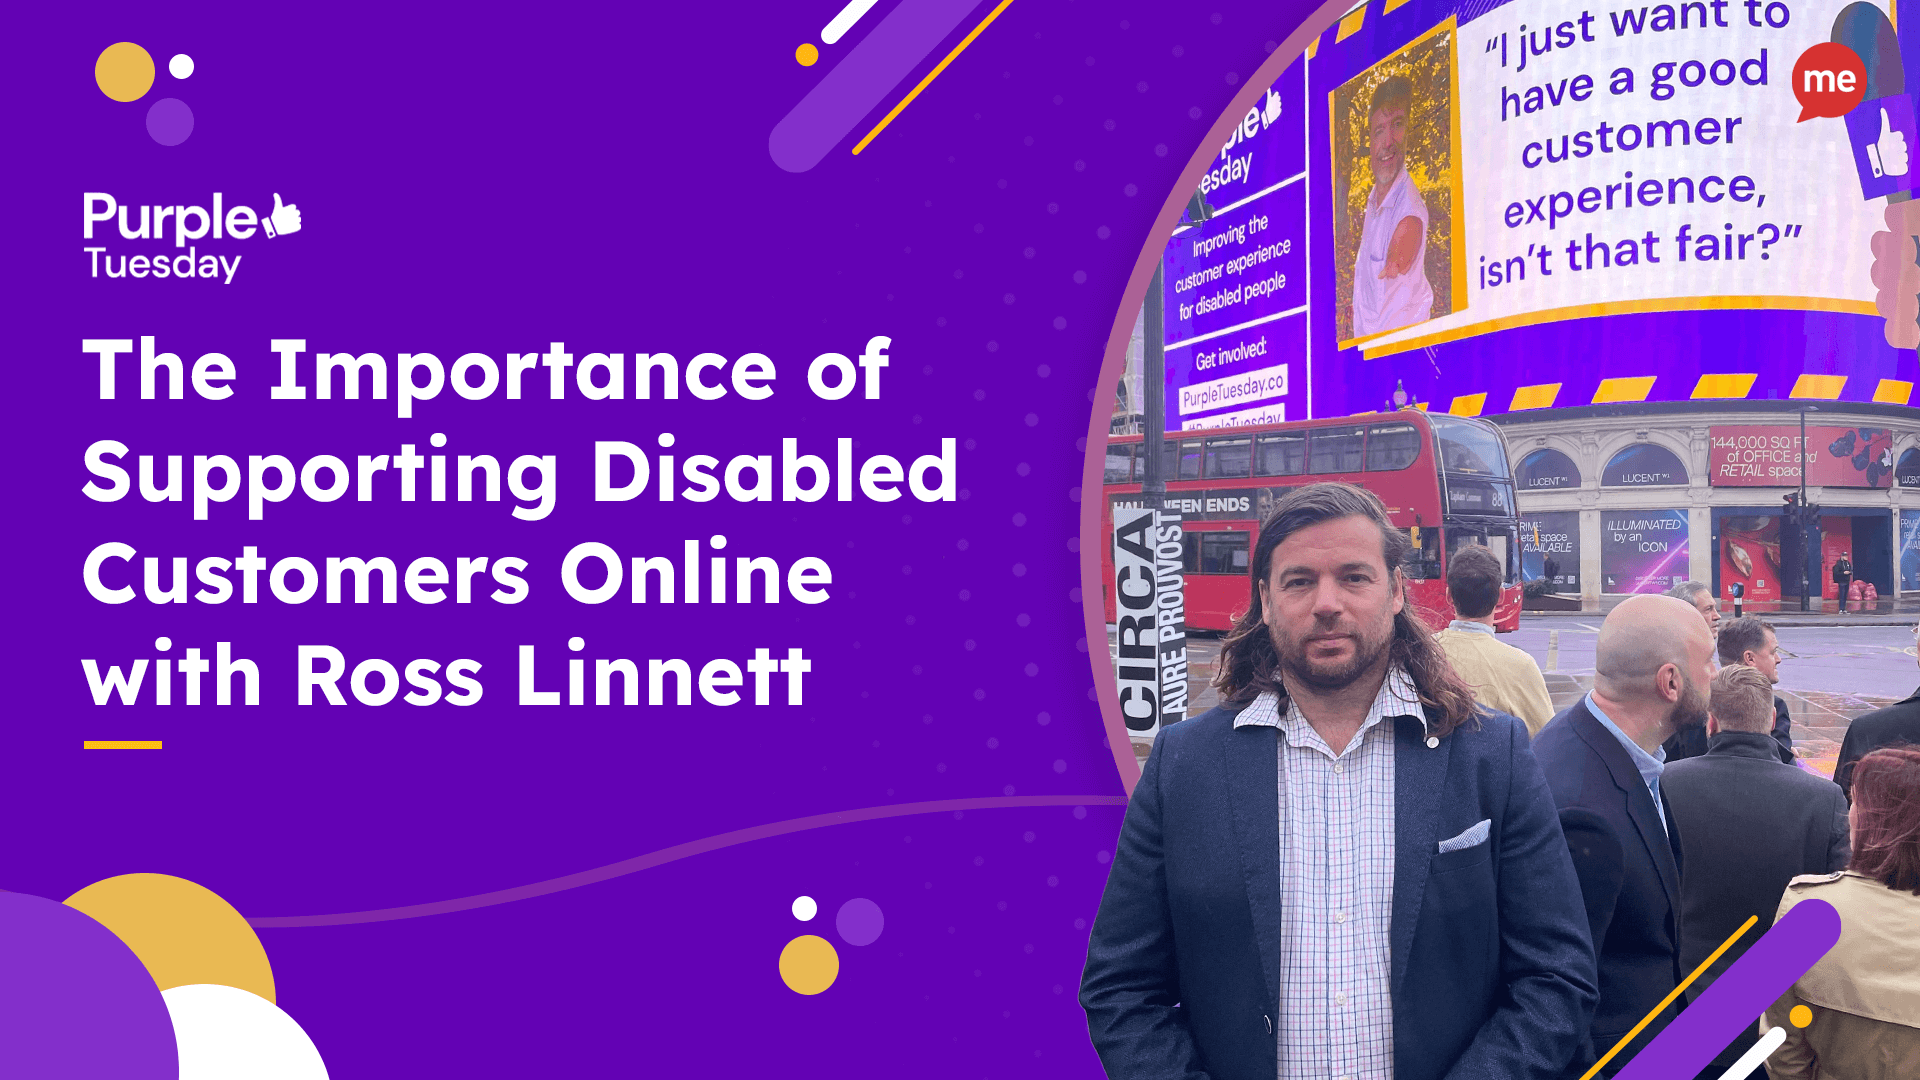 The Importance of Supporting Disabled Customers Online with Ross Linnett